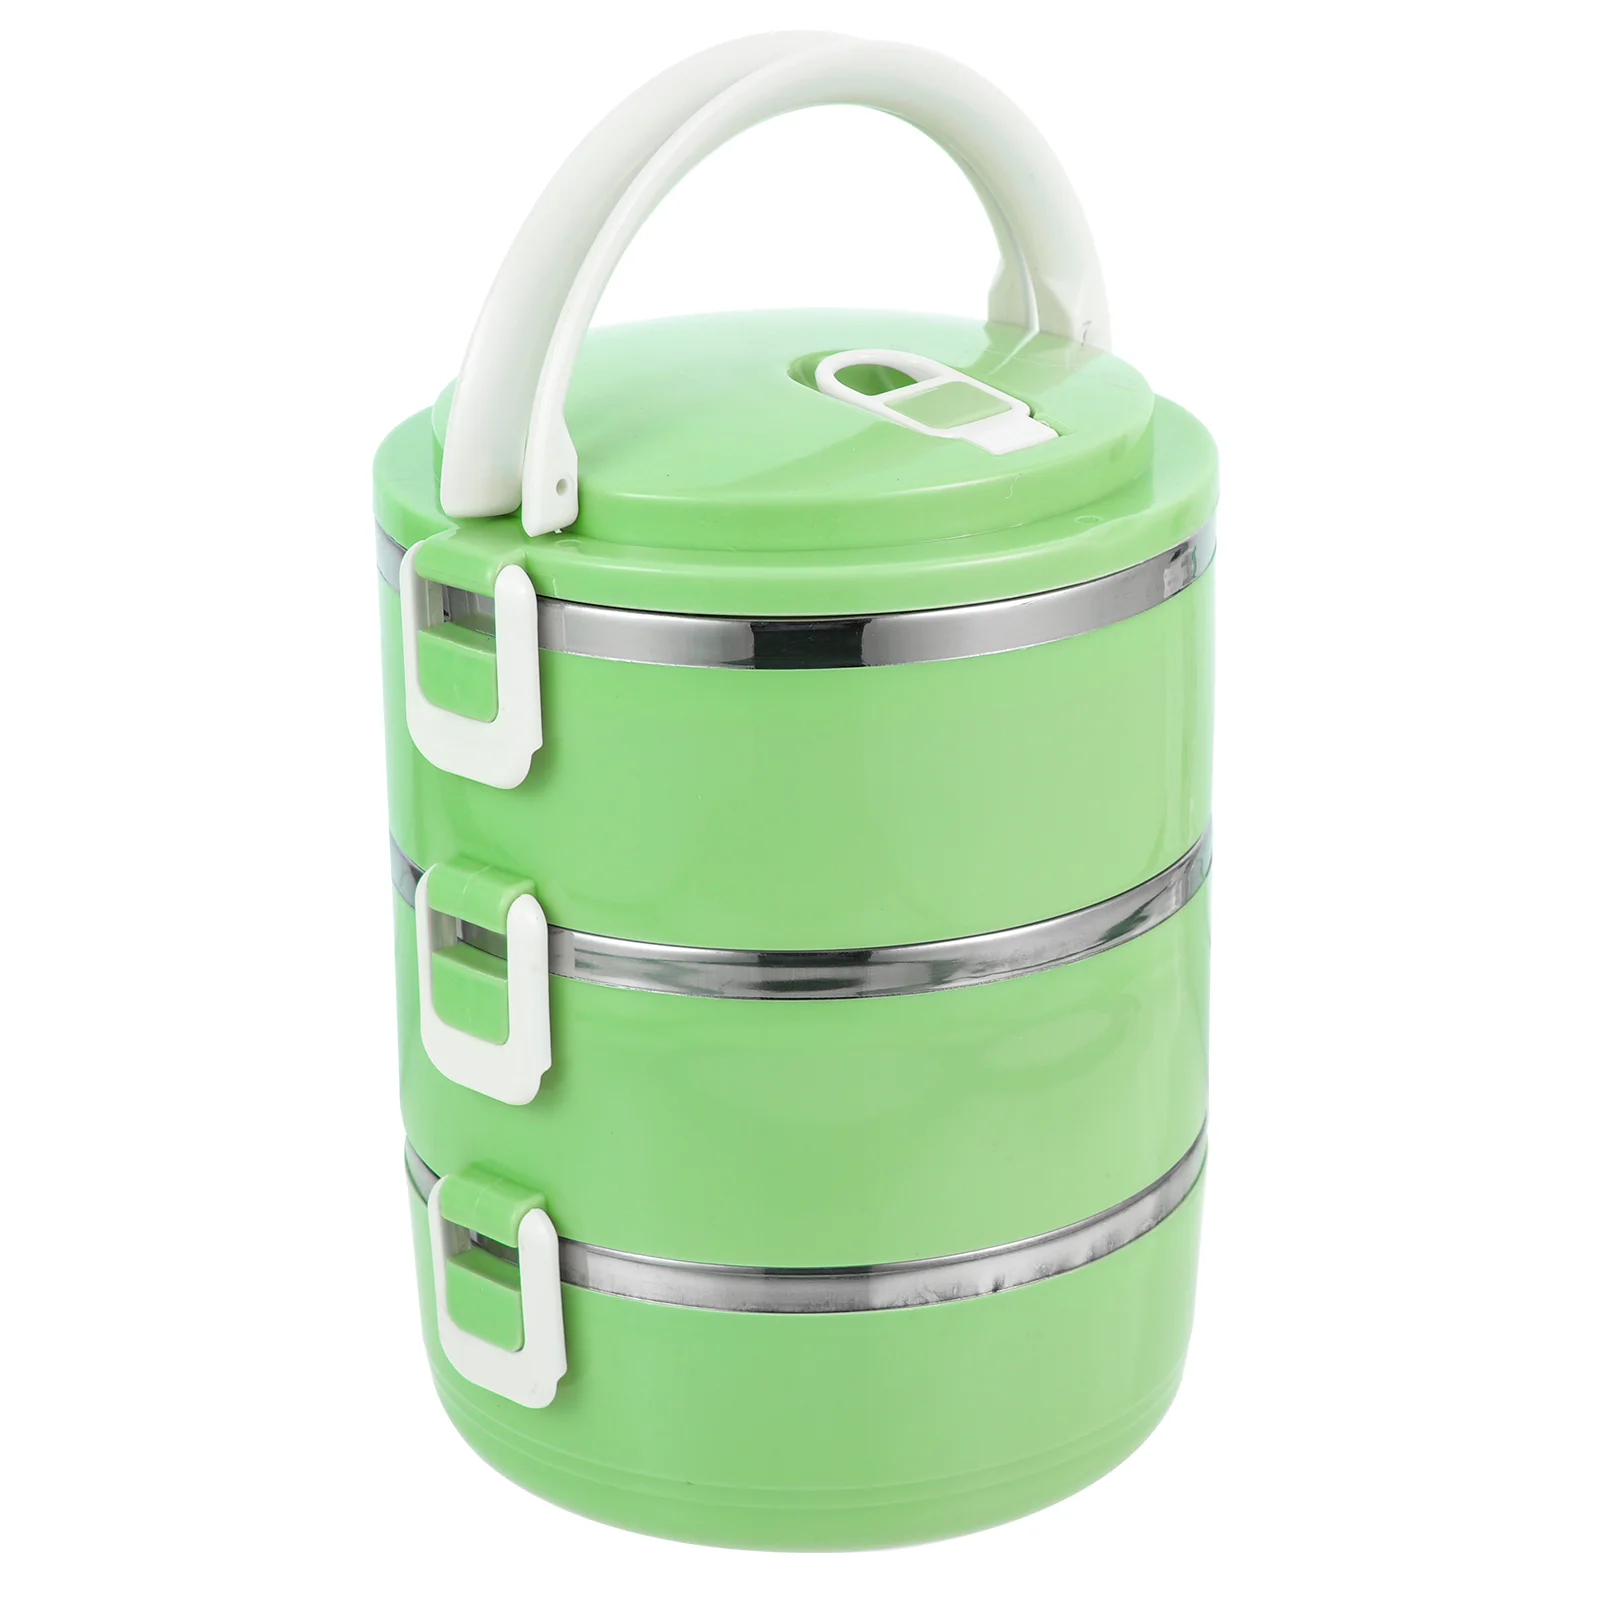 

Box Bento Lunch Container Stackable Stainless Steel Containers Tier Insulated Portable Compartment Tiffin Stacking Camping Jar